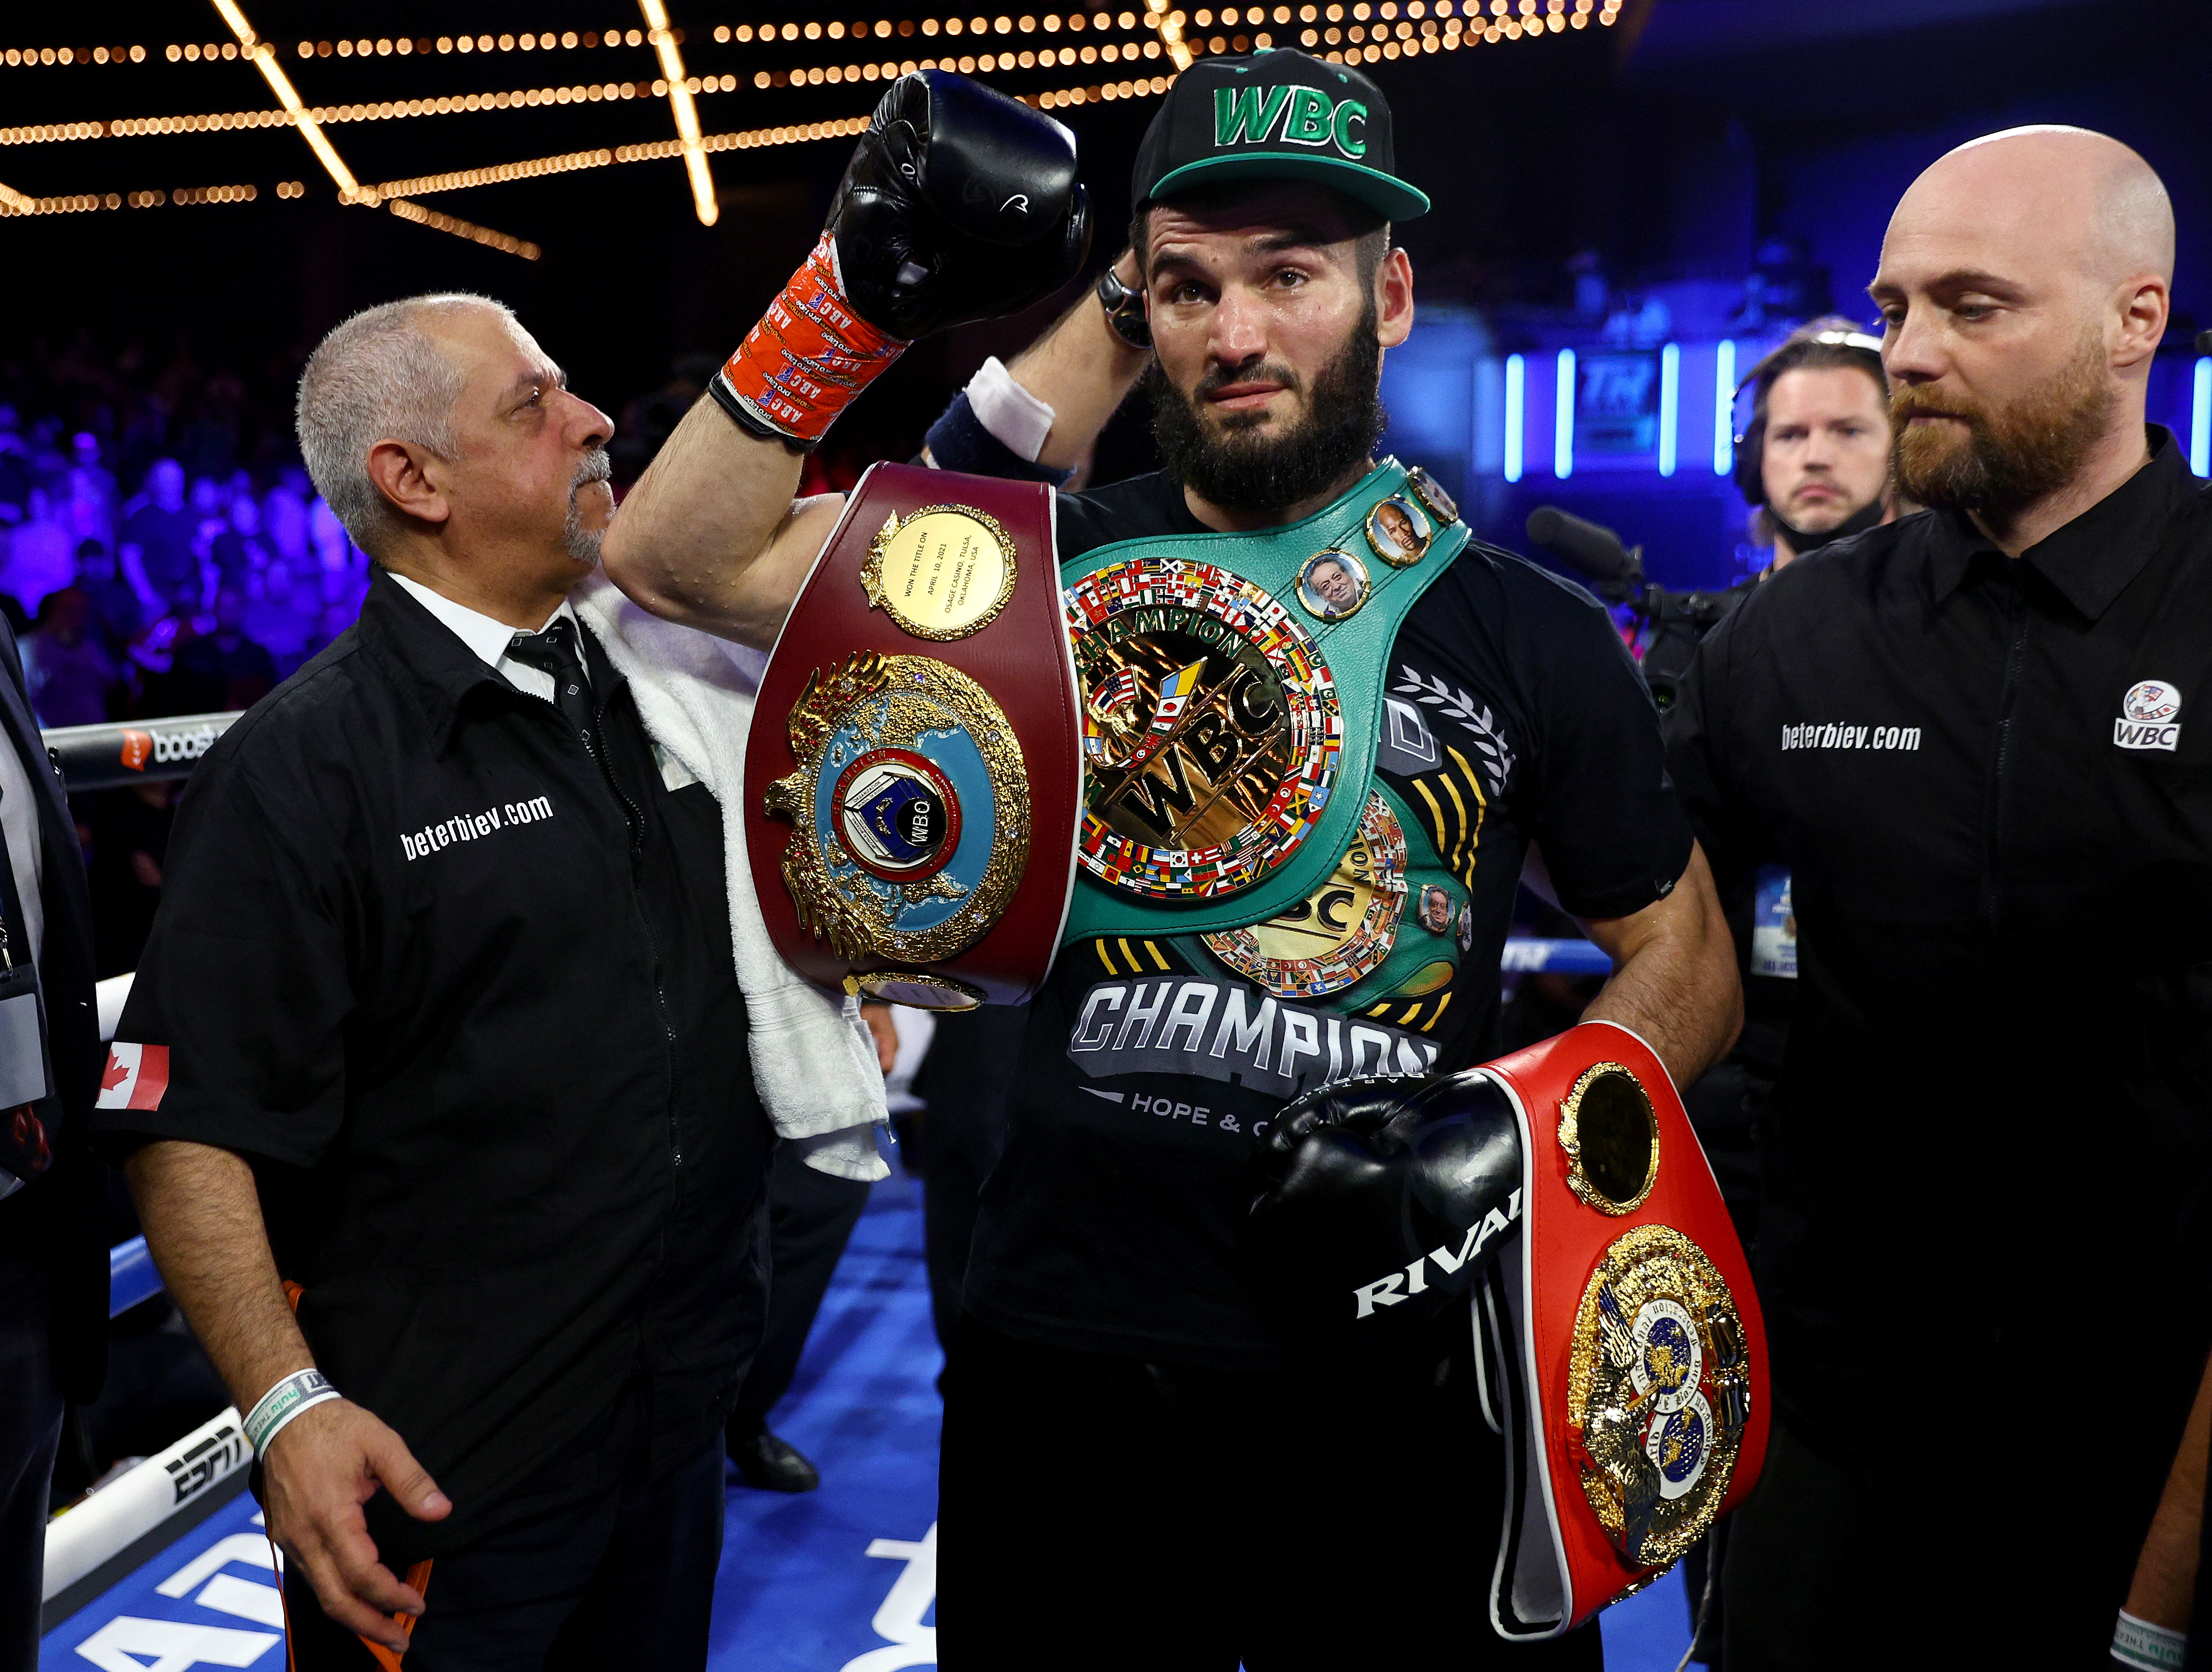 Artur Beterbiev demolished Joe Smith Jr with relative ease to unify three belts